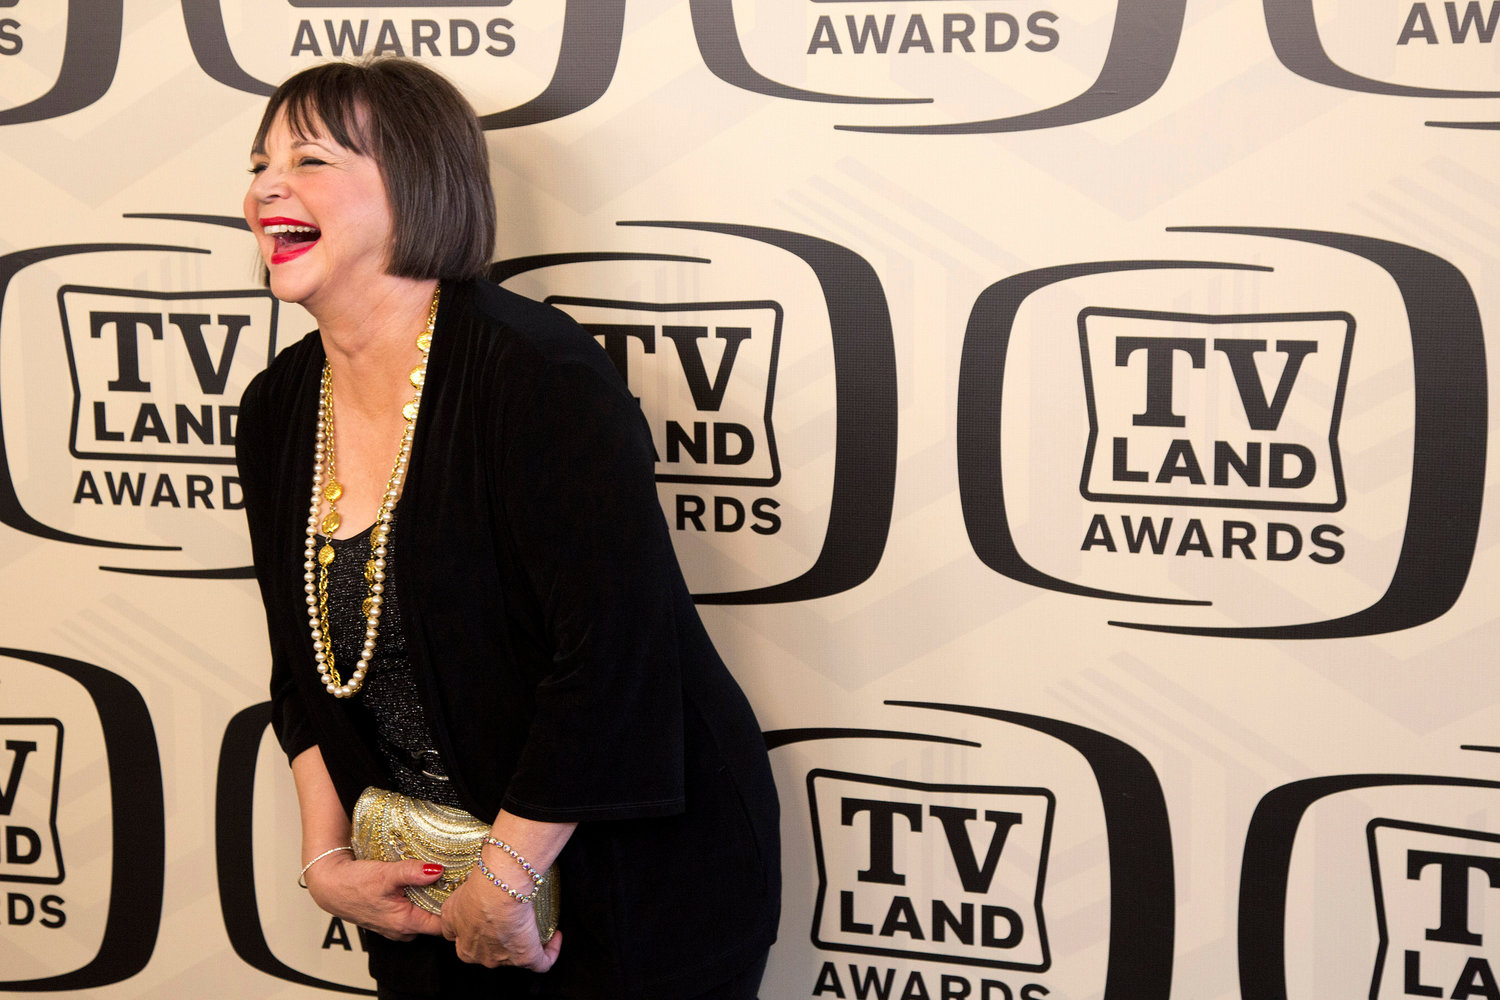 Cindy Williams arrives to the TV Land Awards 10th Anniversary in New York on April 14, 2012. Williams, who played Shirley opposite Penny Marshall's Laverne on the popular sitcom "Laverne & Shirley," died Wednesday, Jan. 25, 2023, in Los Angeles at age 75, her family said Monday, Jan. 30.